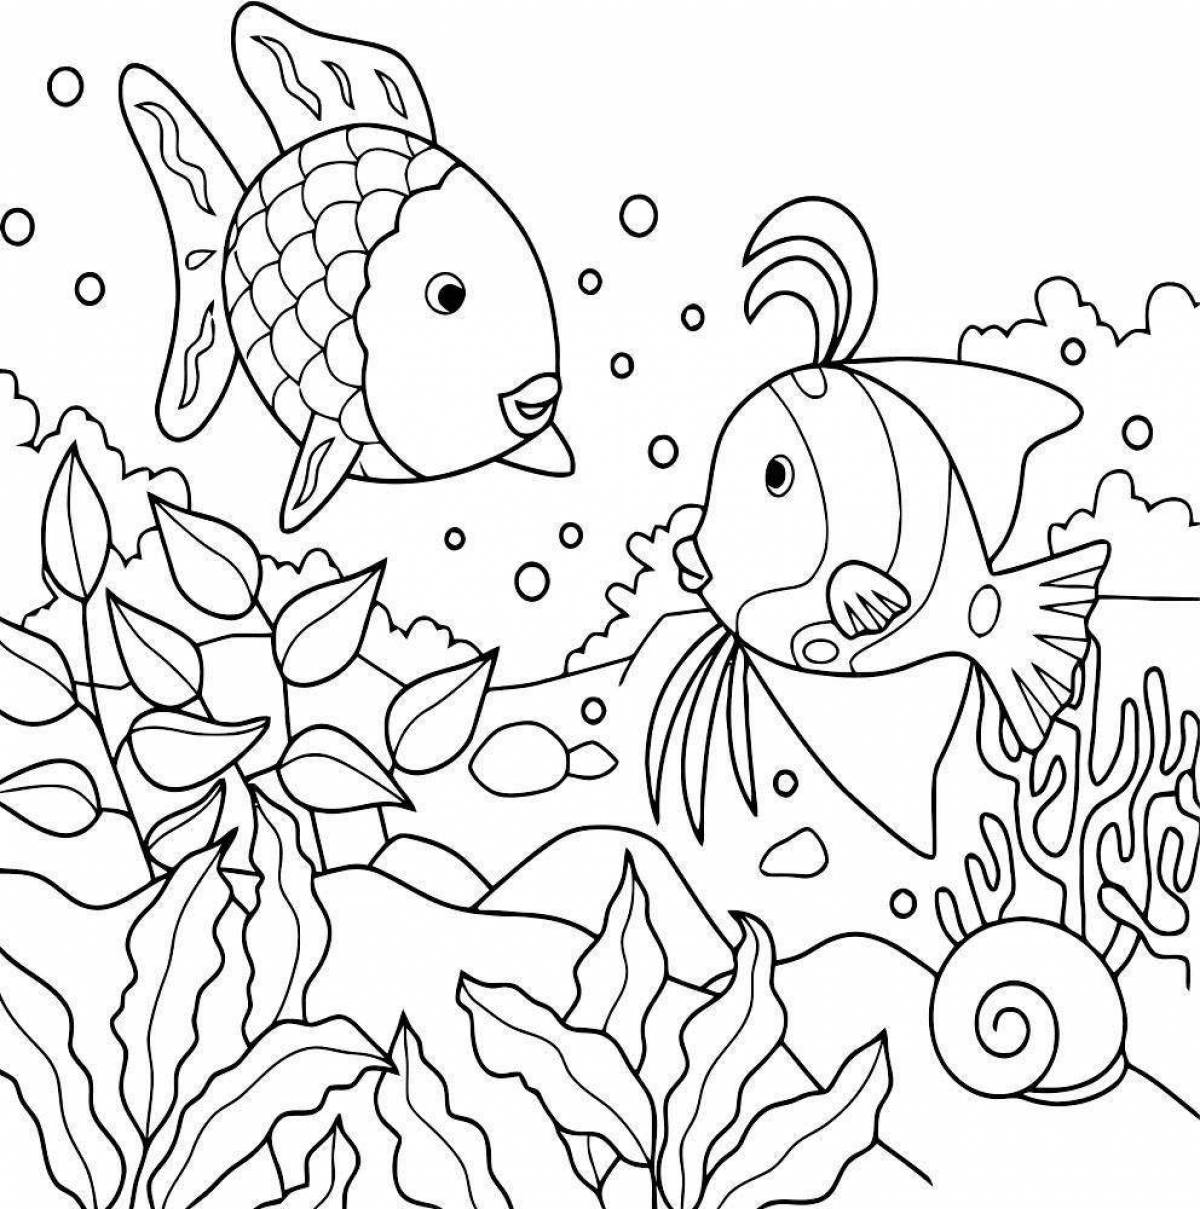 Glitter fish coloring book for 5-6 year olds